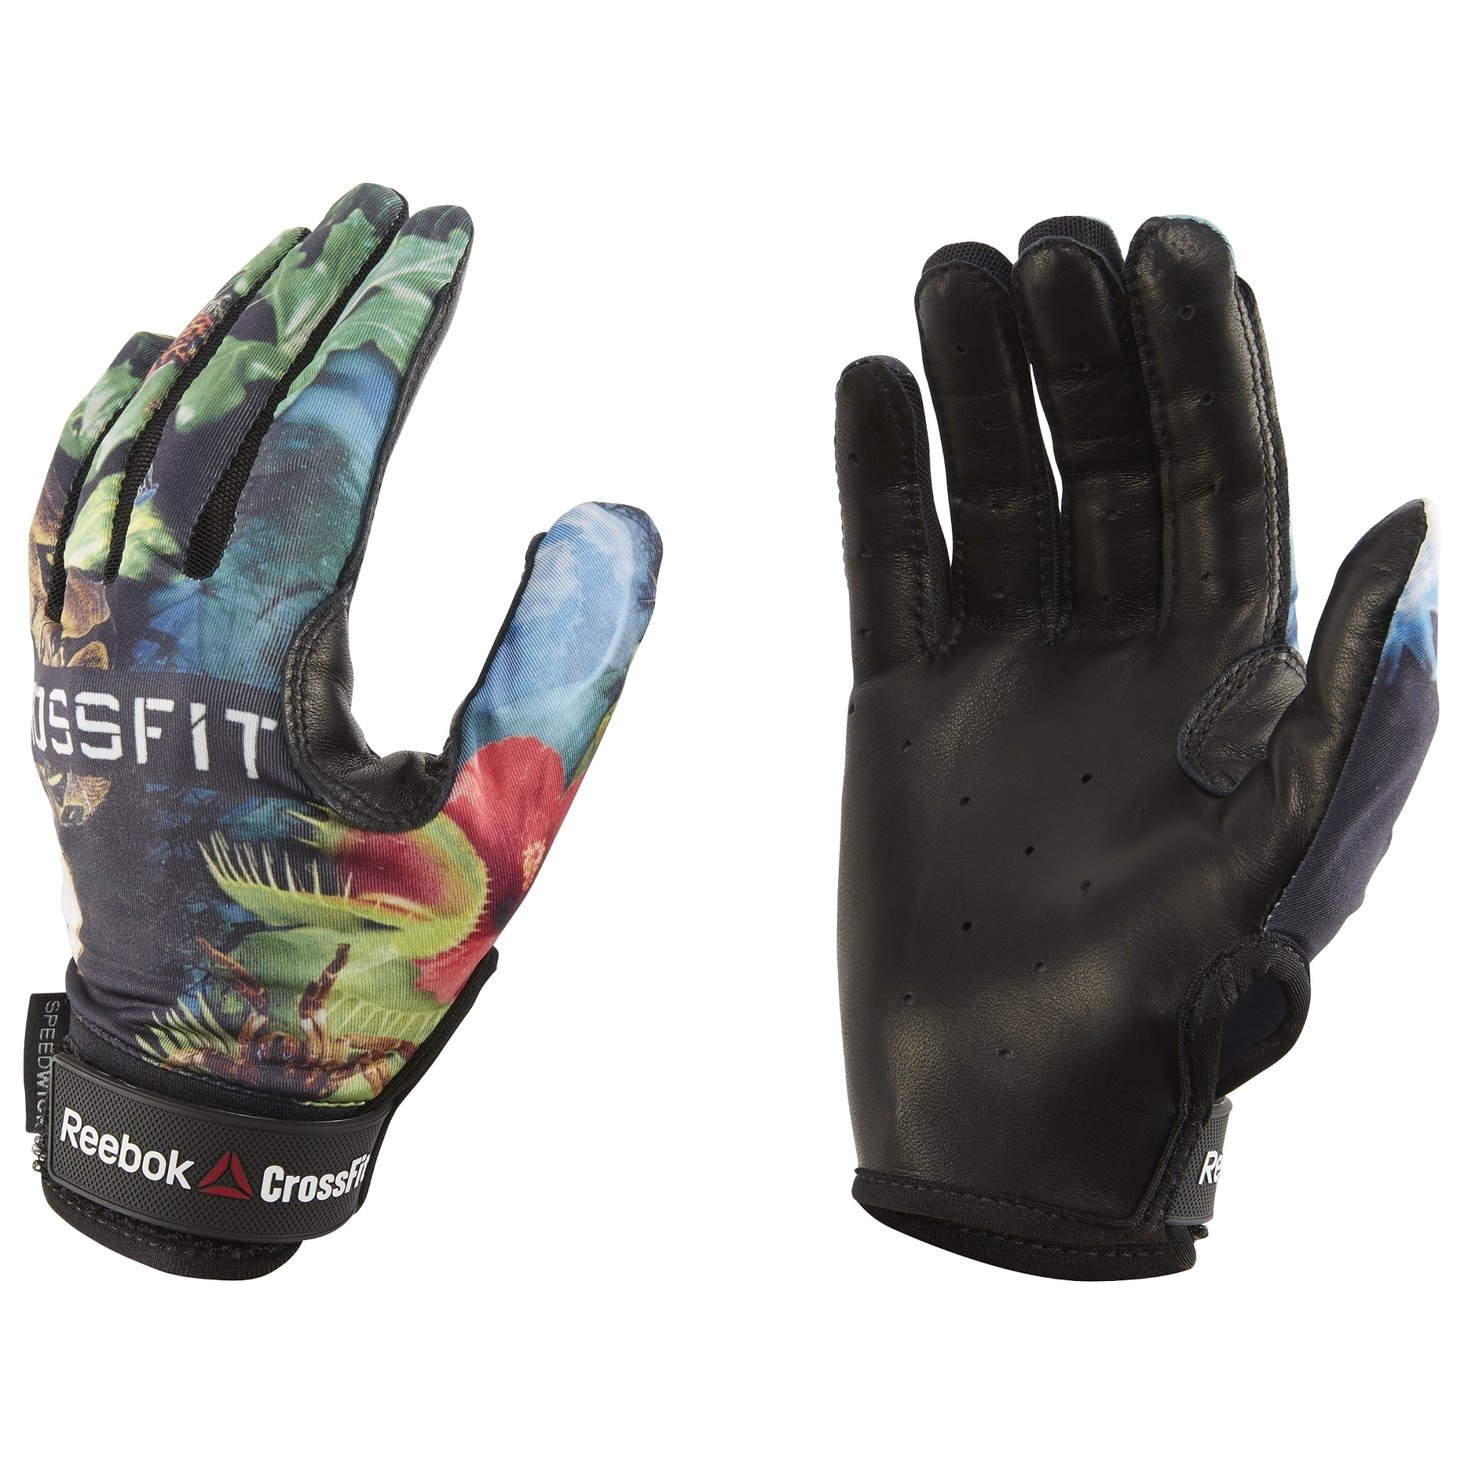 Reebok CrossFit Womens Competition Glove